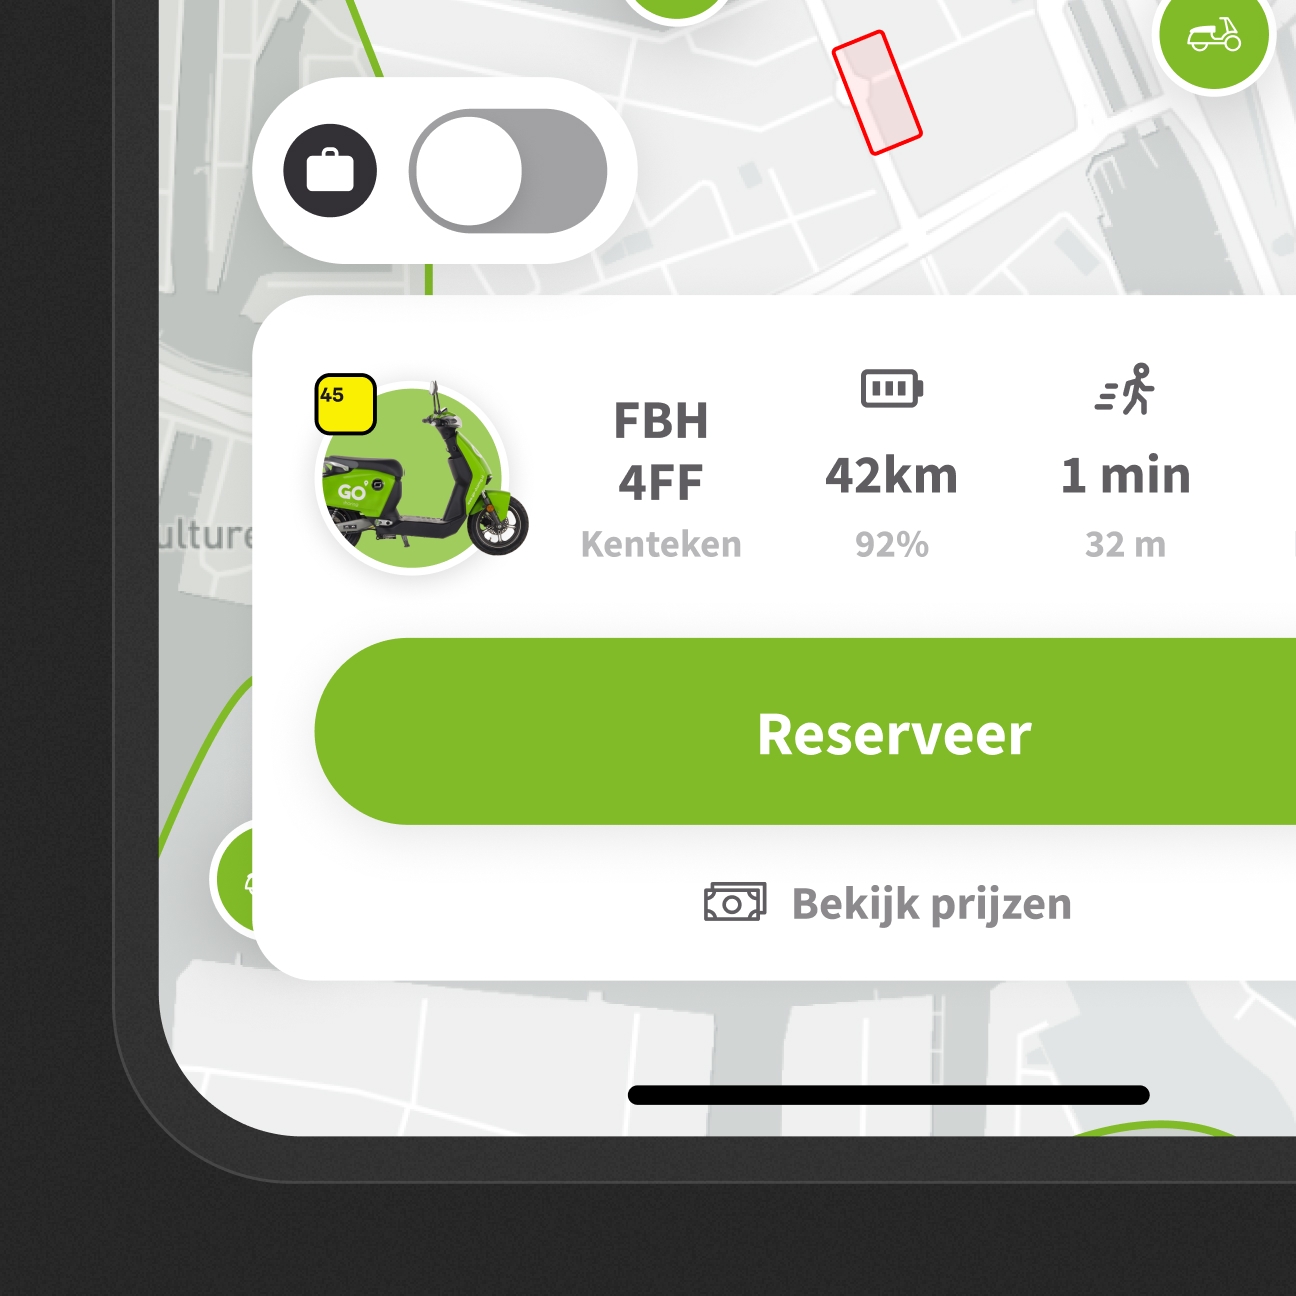 A screen of the GO Sharing app. It shows a map with the location of the selected scooter and the option to reserve it.